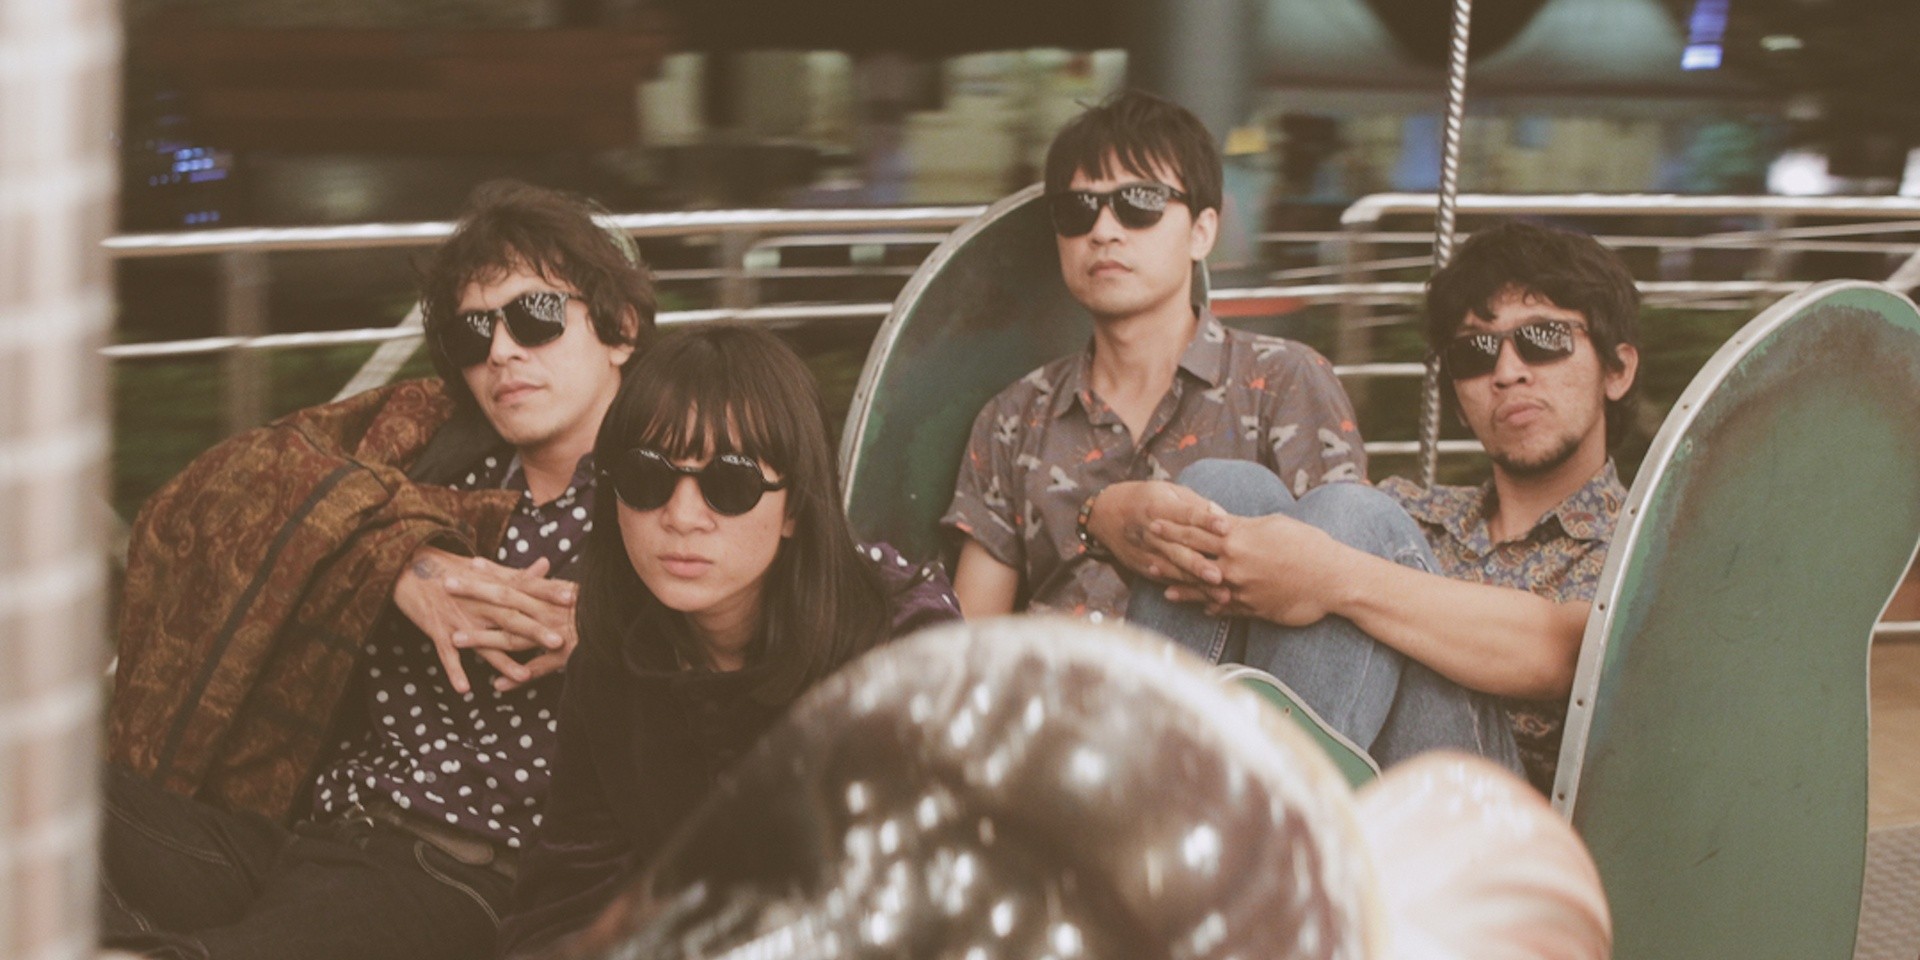 WATCH: Indonesian 1960's revival band Indische Party's new video 'Khilaf'